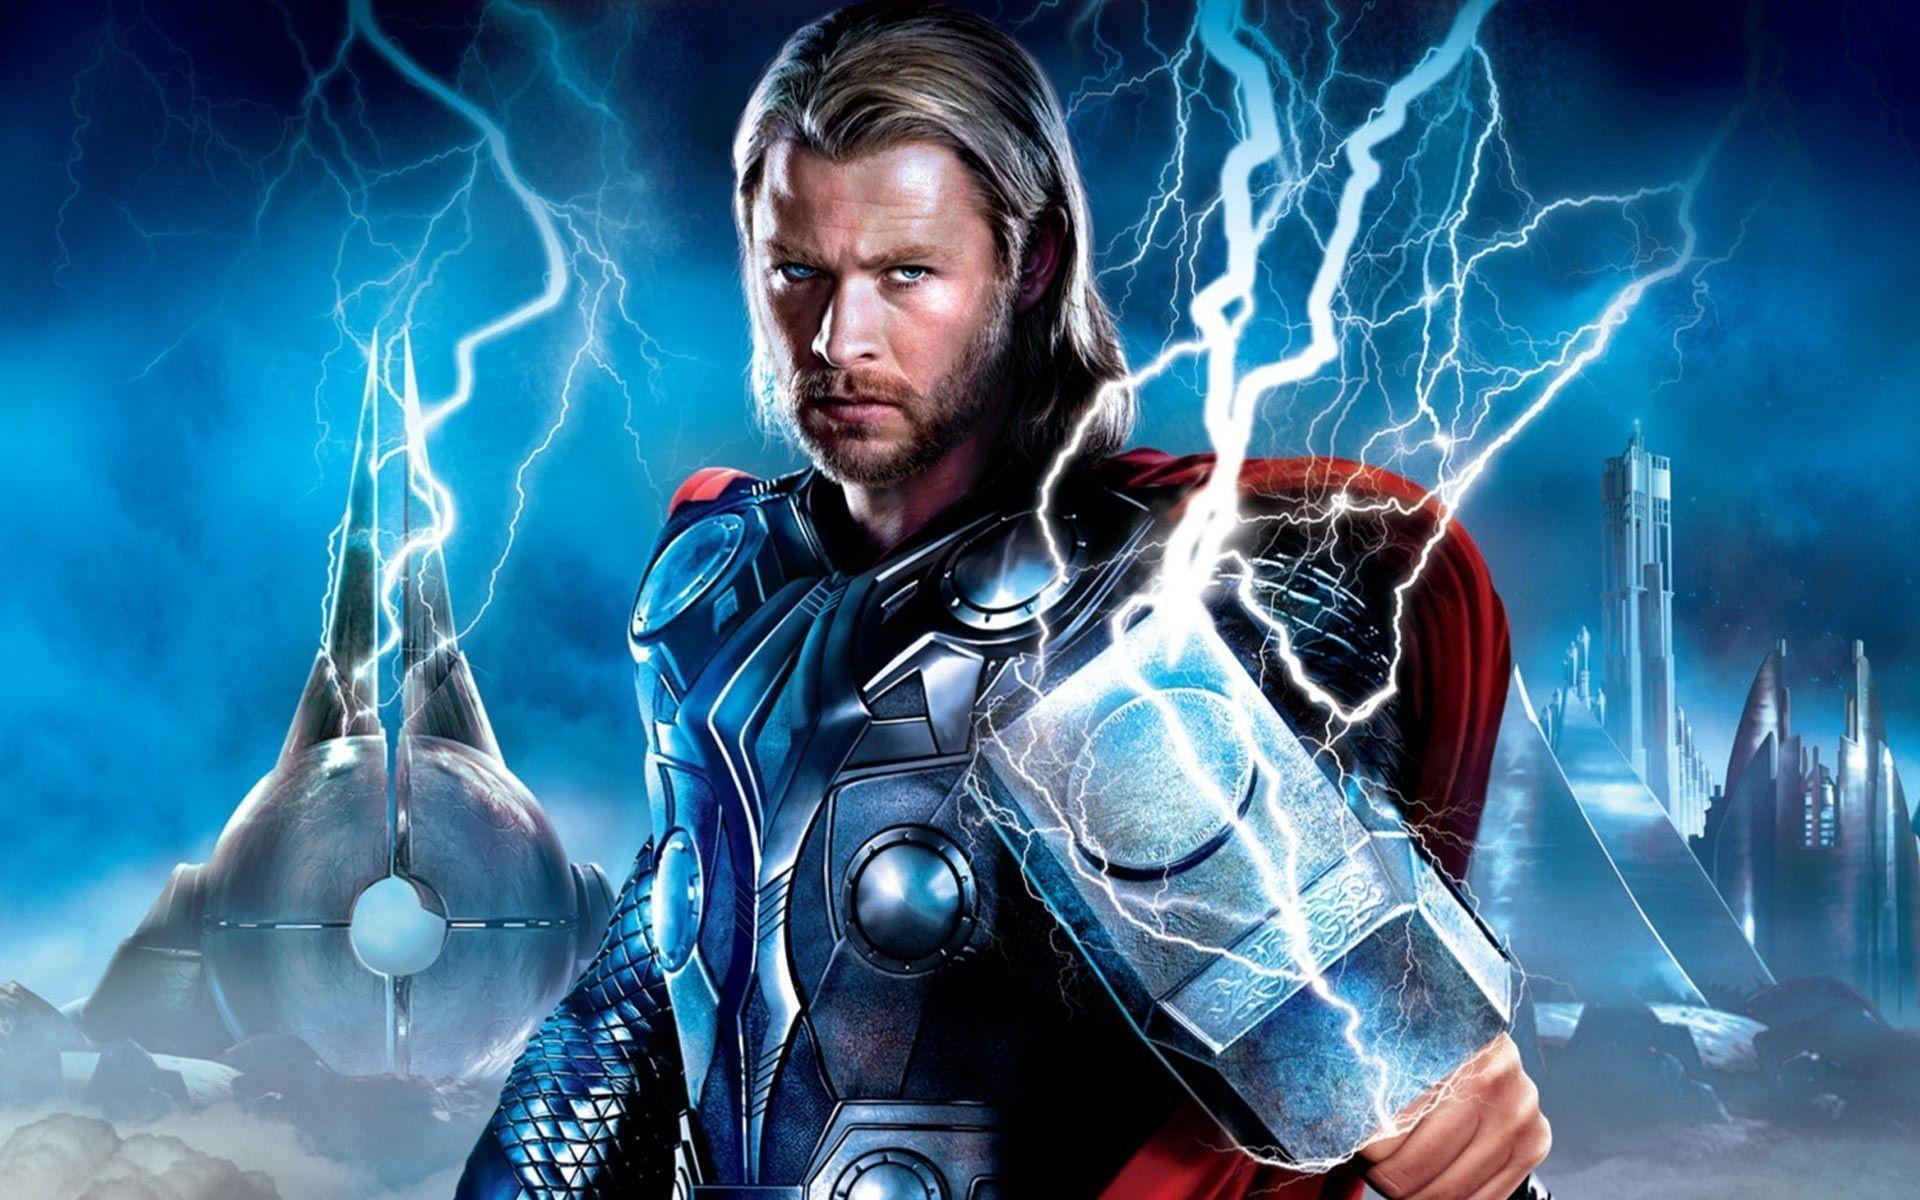 Thor Wallpapers - Wallpaper Cave